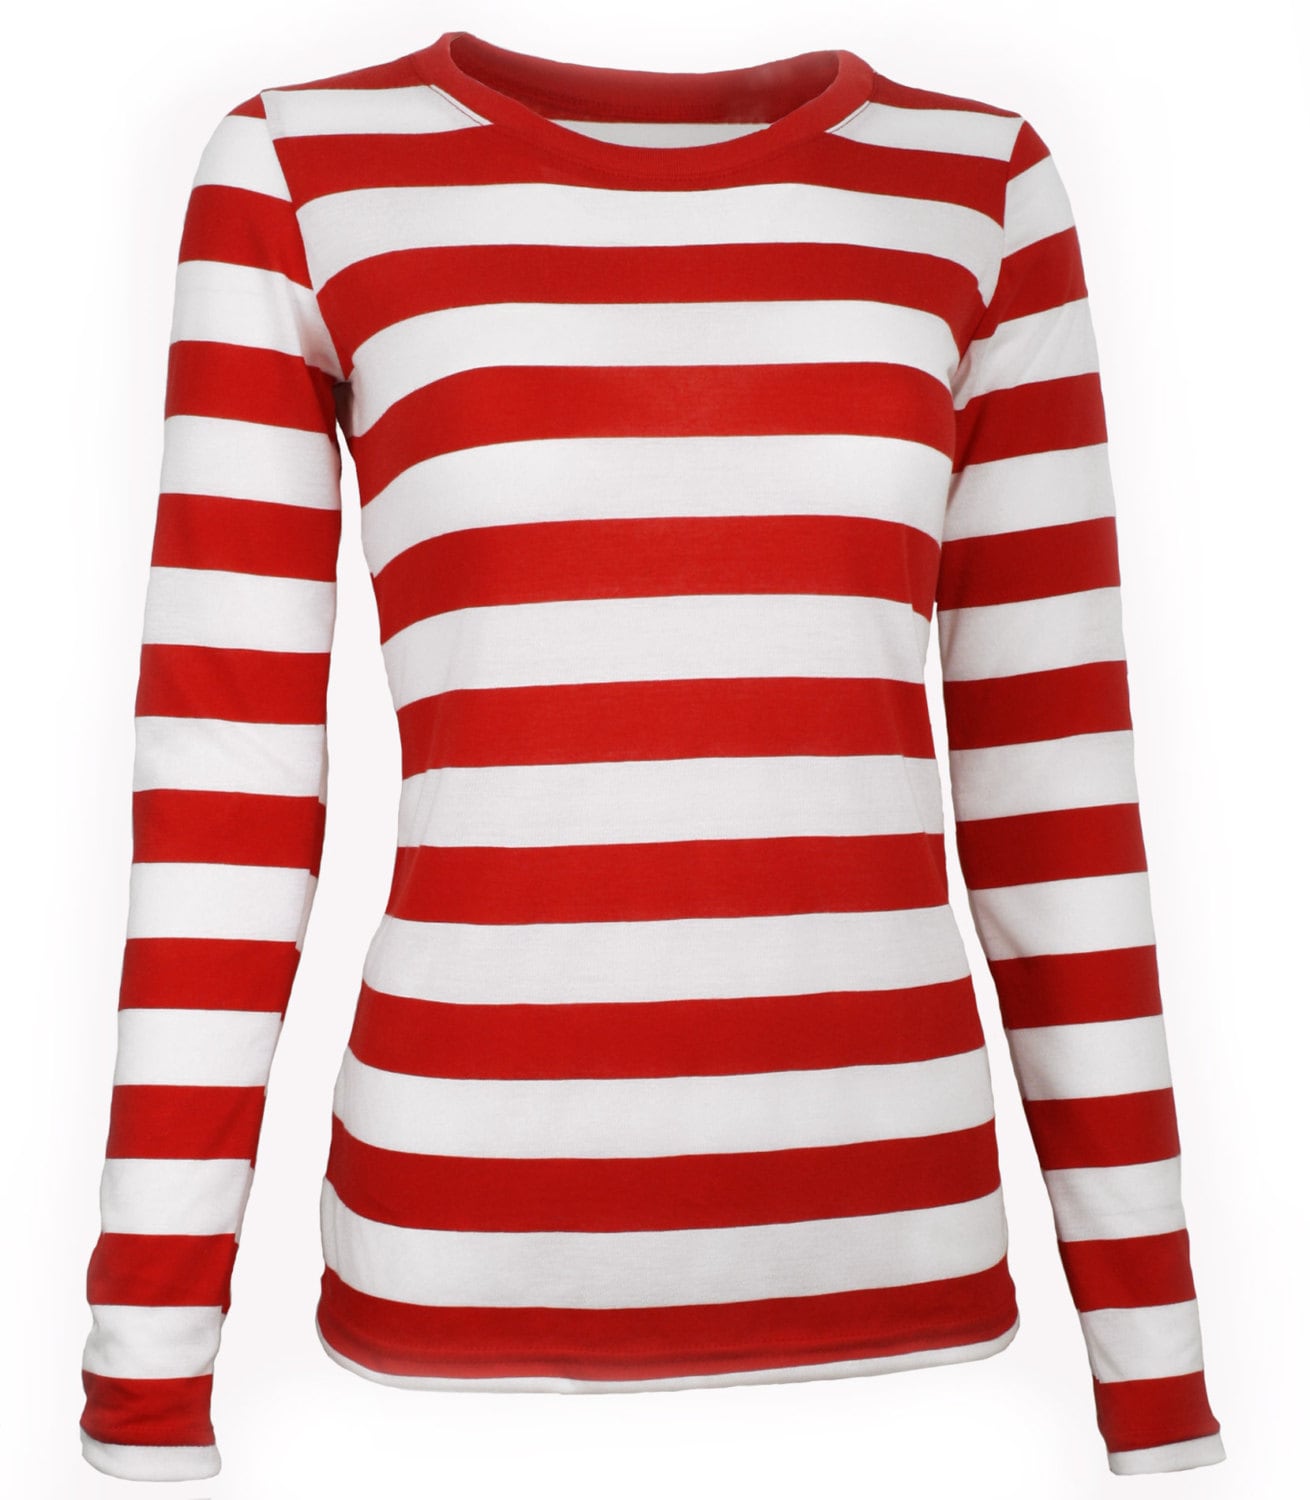 Stripy Red & White T-Shirt Adults Fancy Dress Long Sleeve Top Costume Accessory 